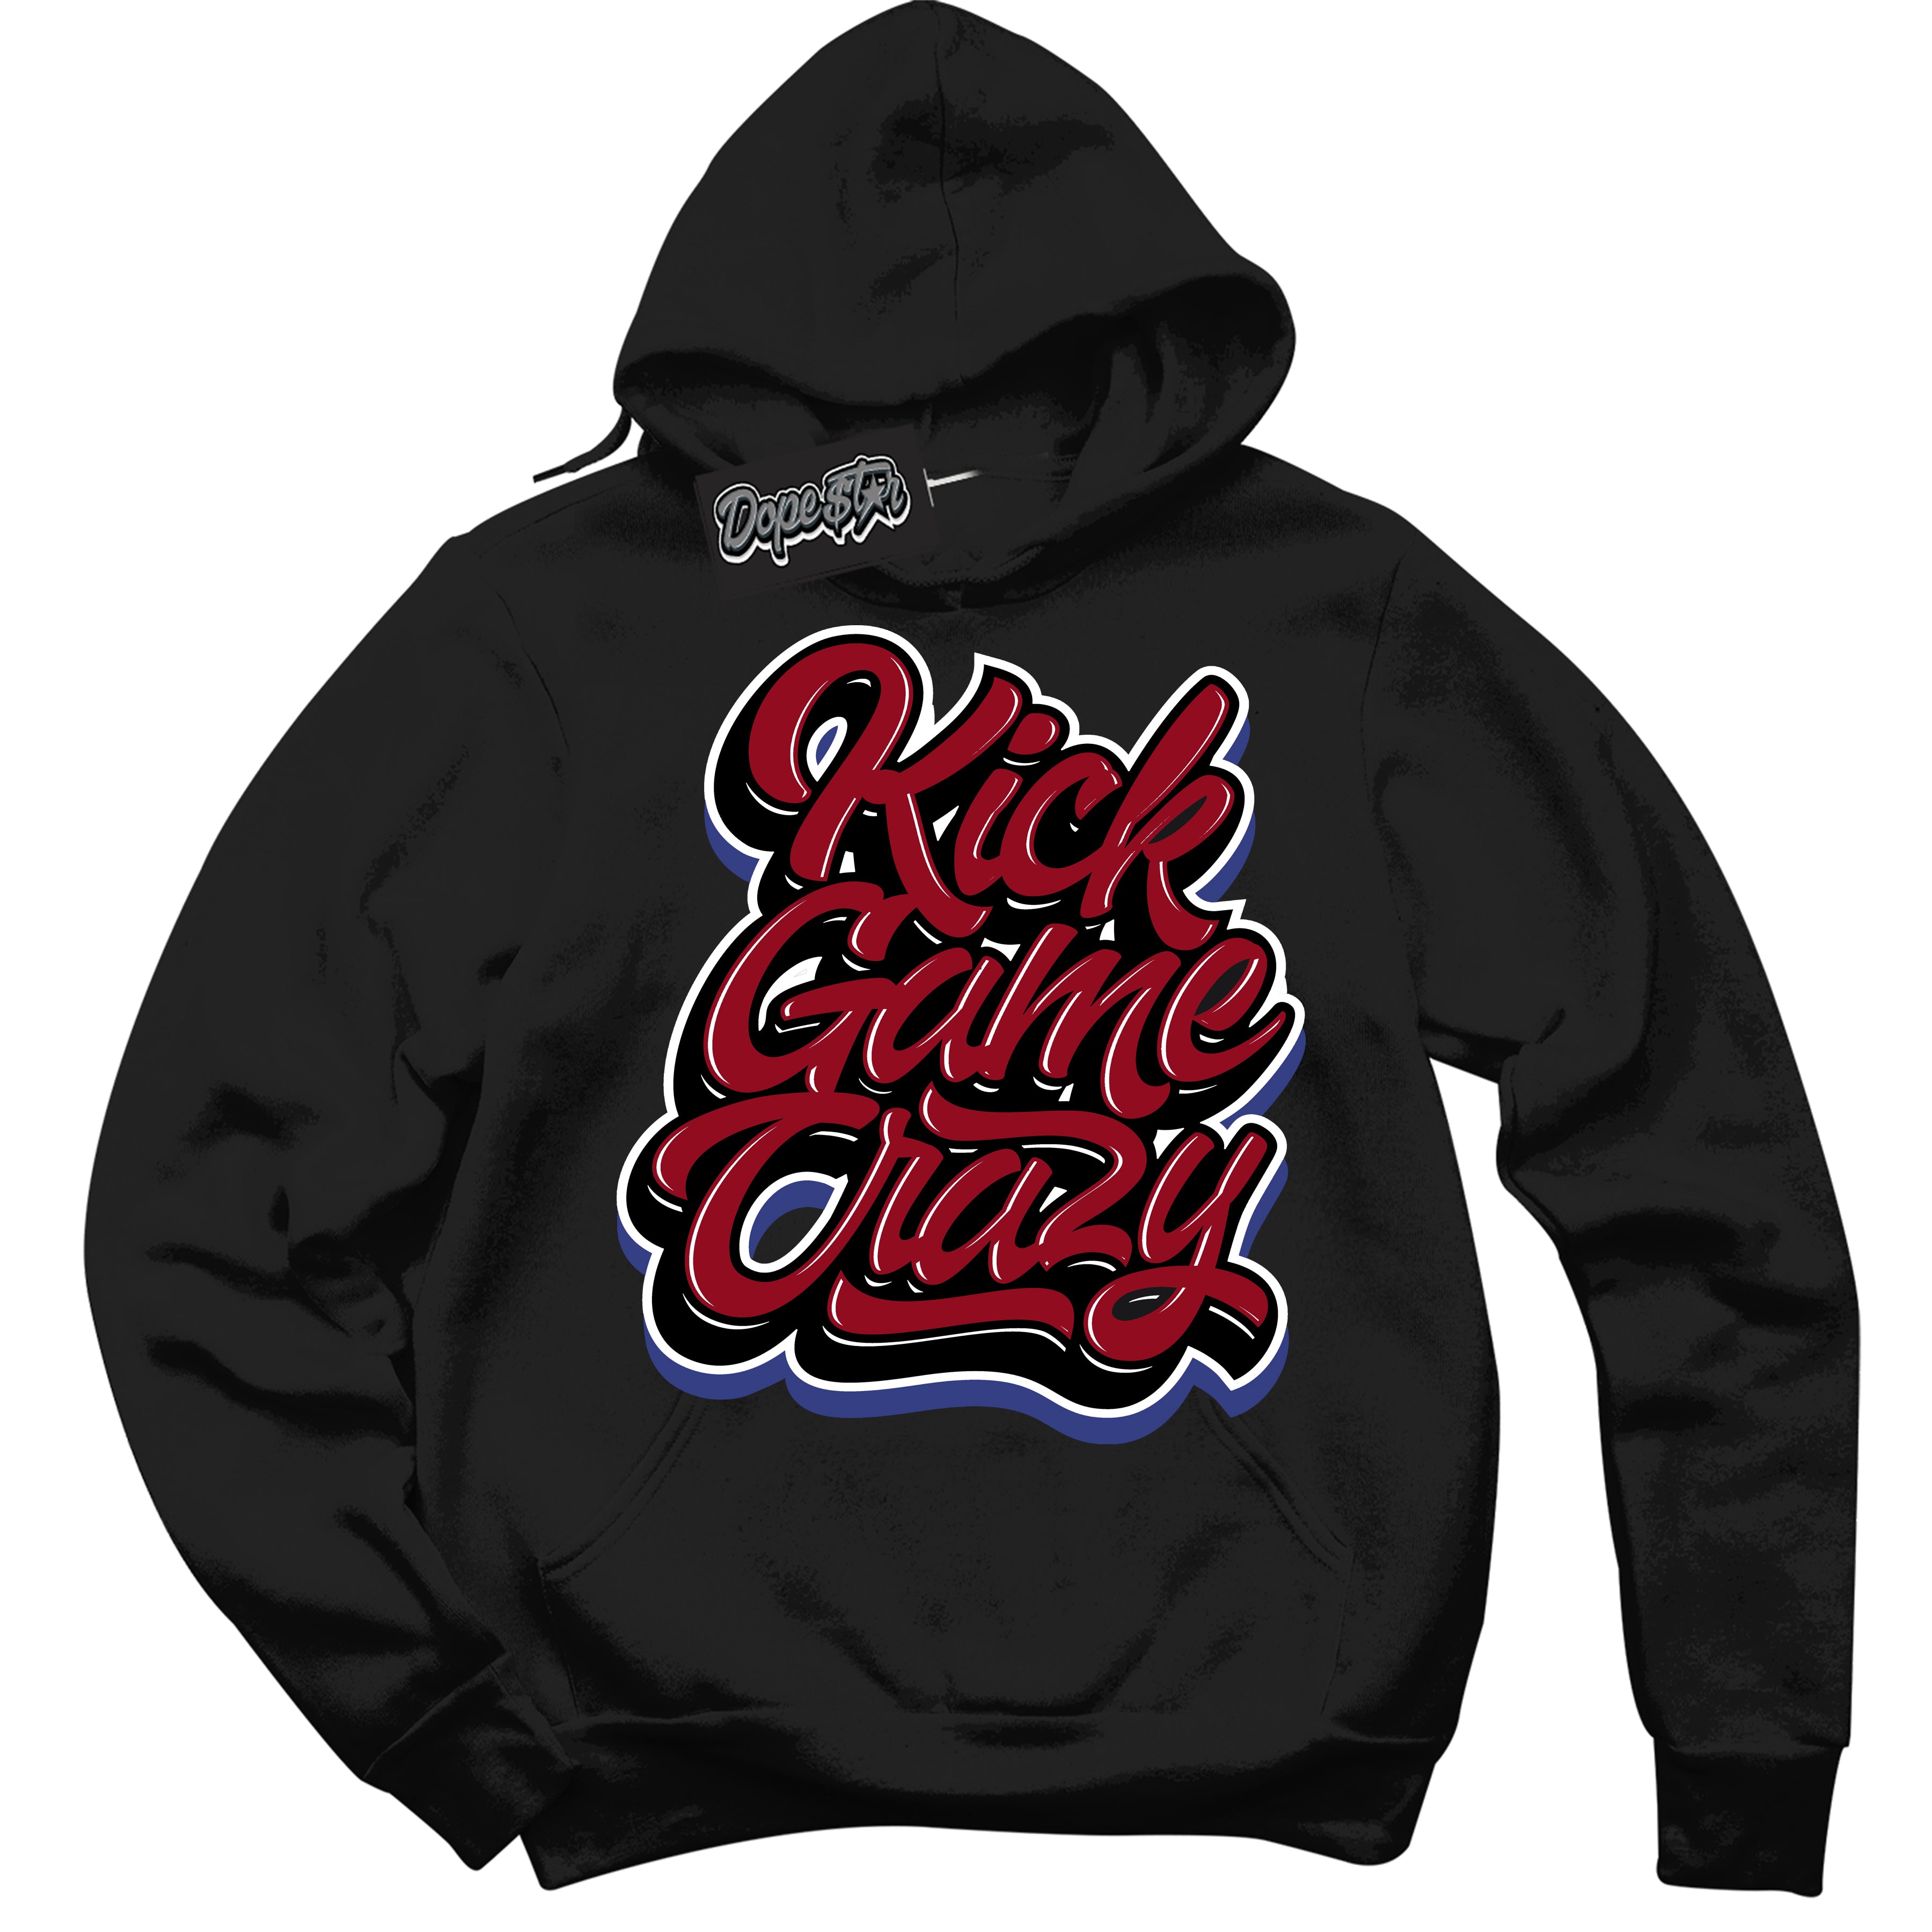 Cool Black Hoodie with “ Kick Game Crazy ”  design that Perfectly Matches Playoffs 8s Sneakers.